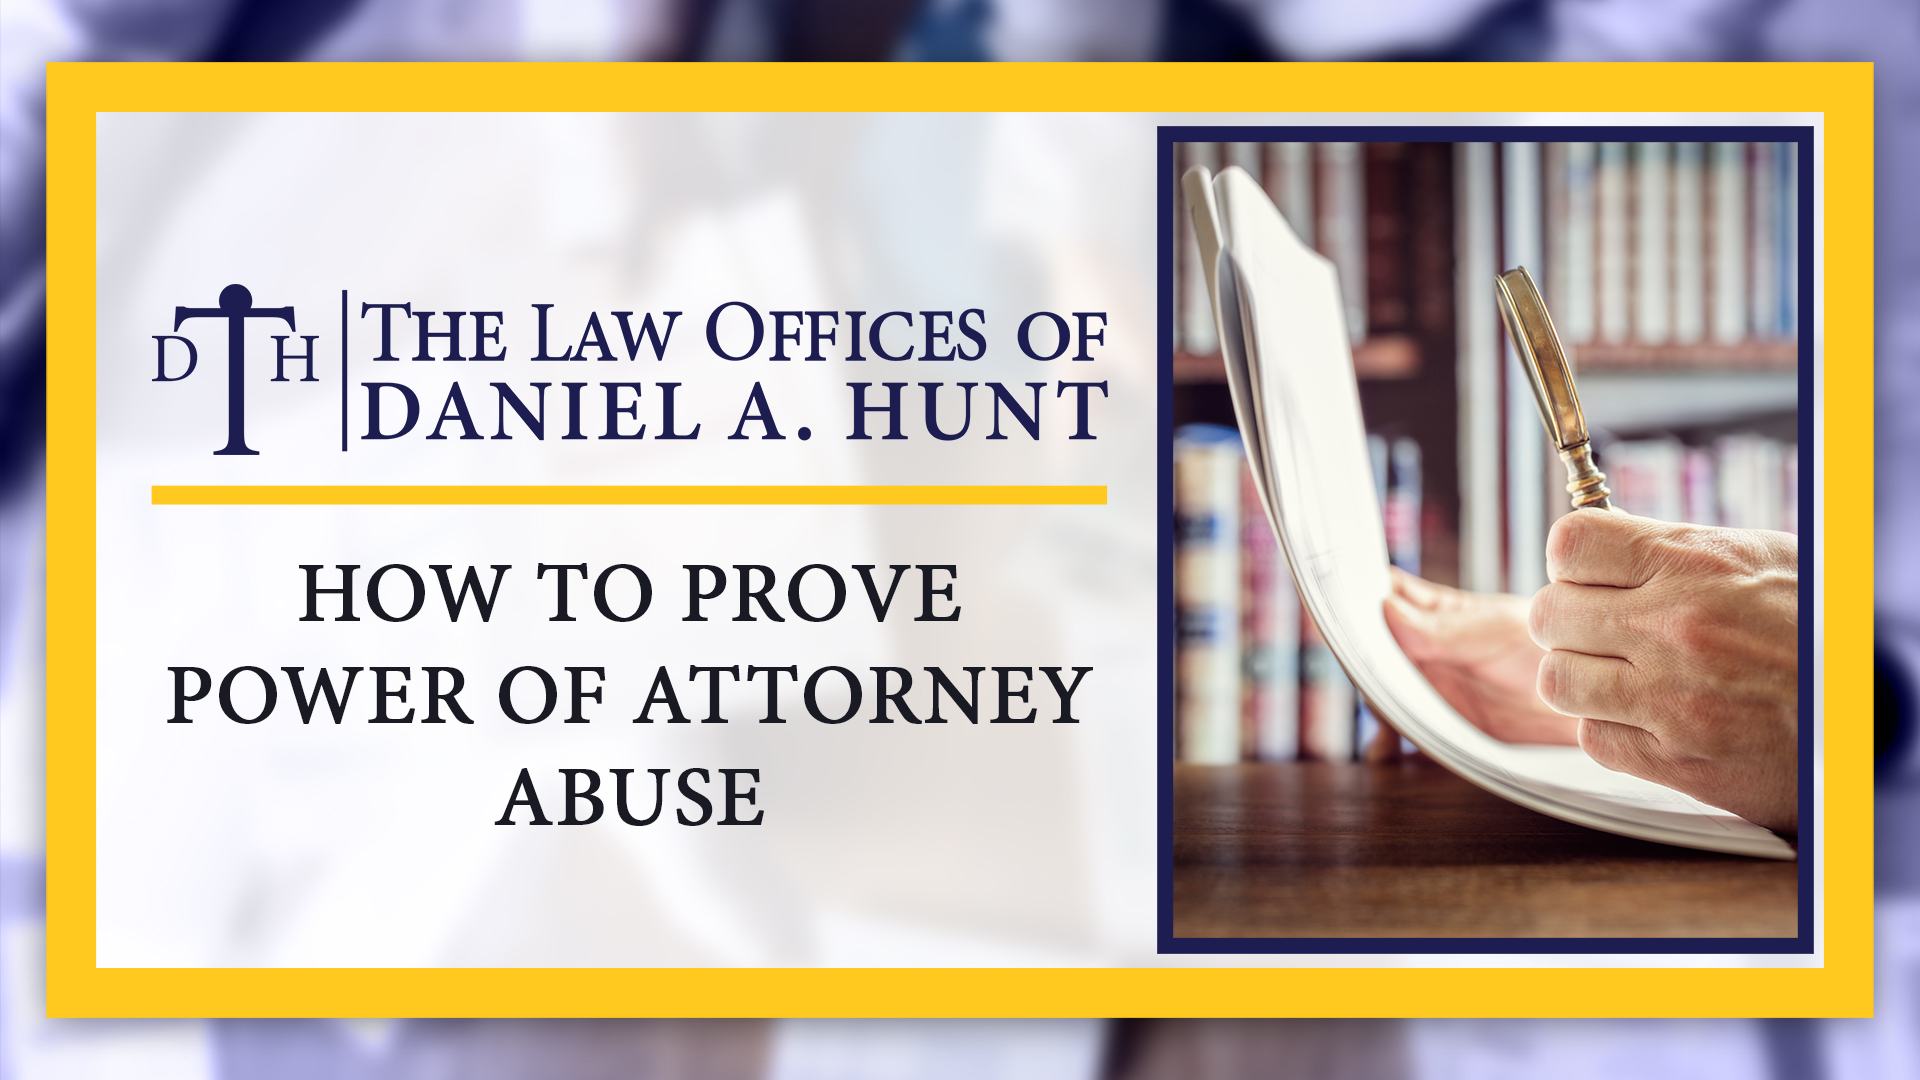 How to prove power of attorney abuse